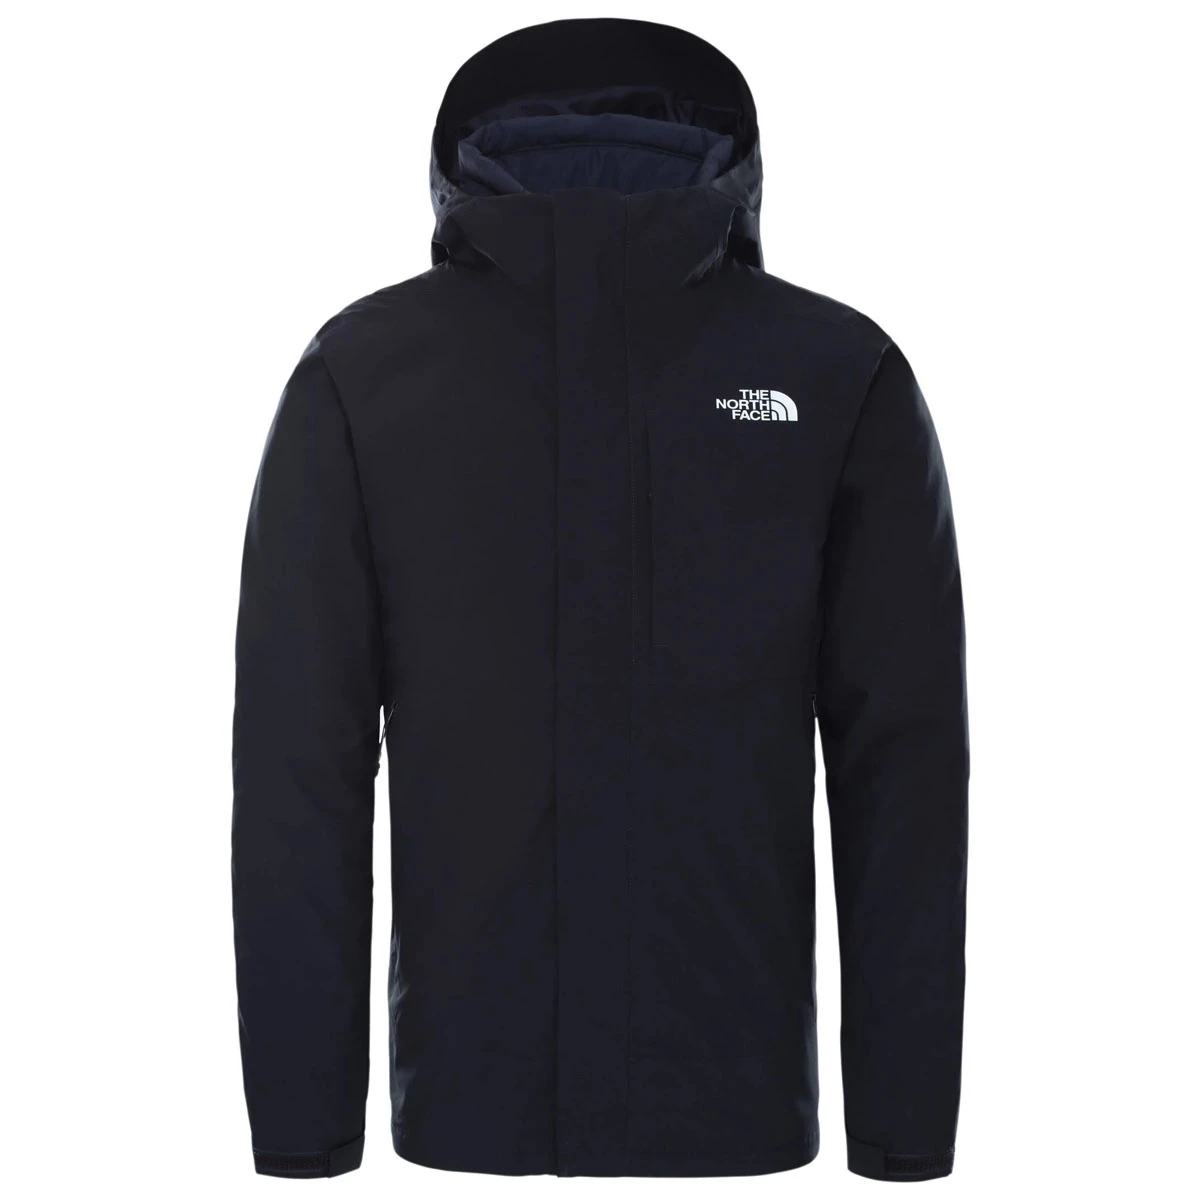 Afbeelding van The North Face Carto triclimate jack